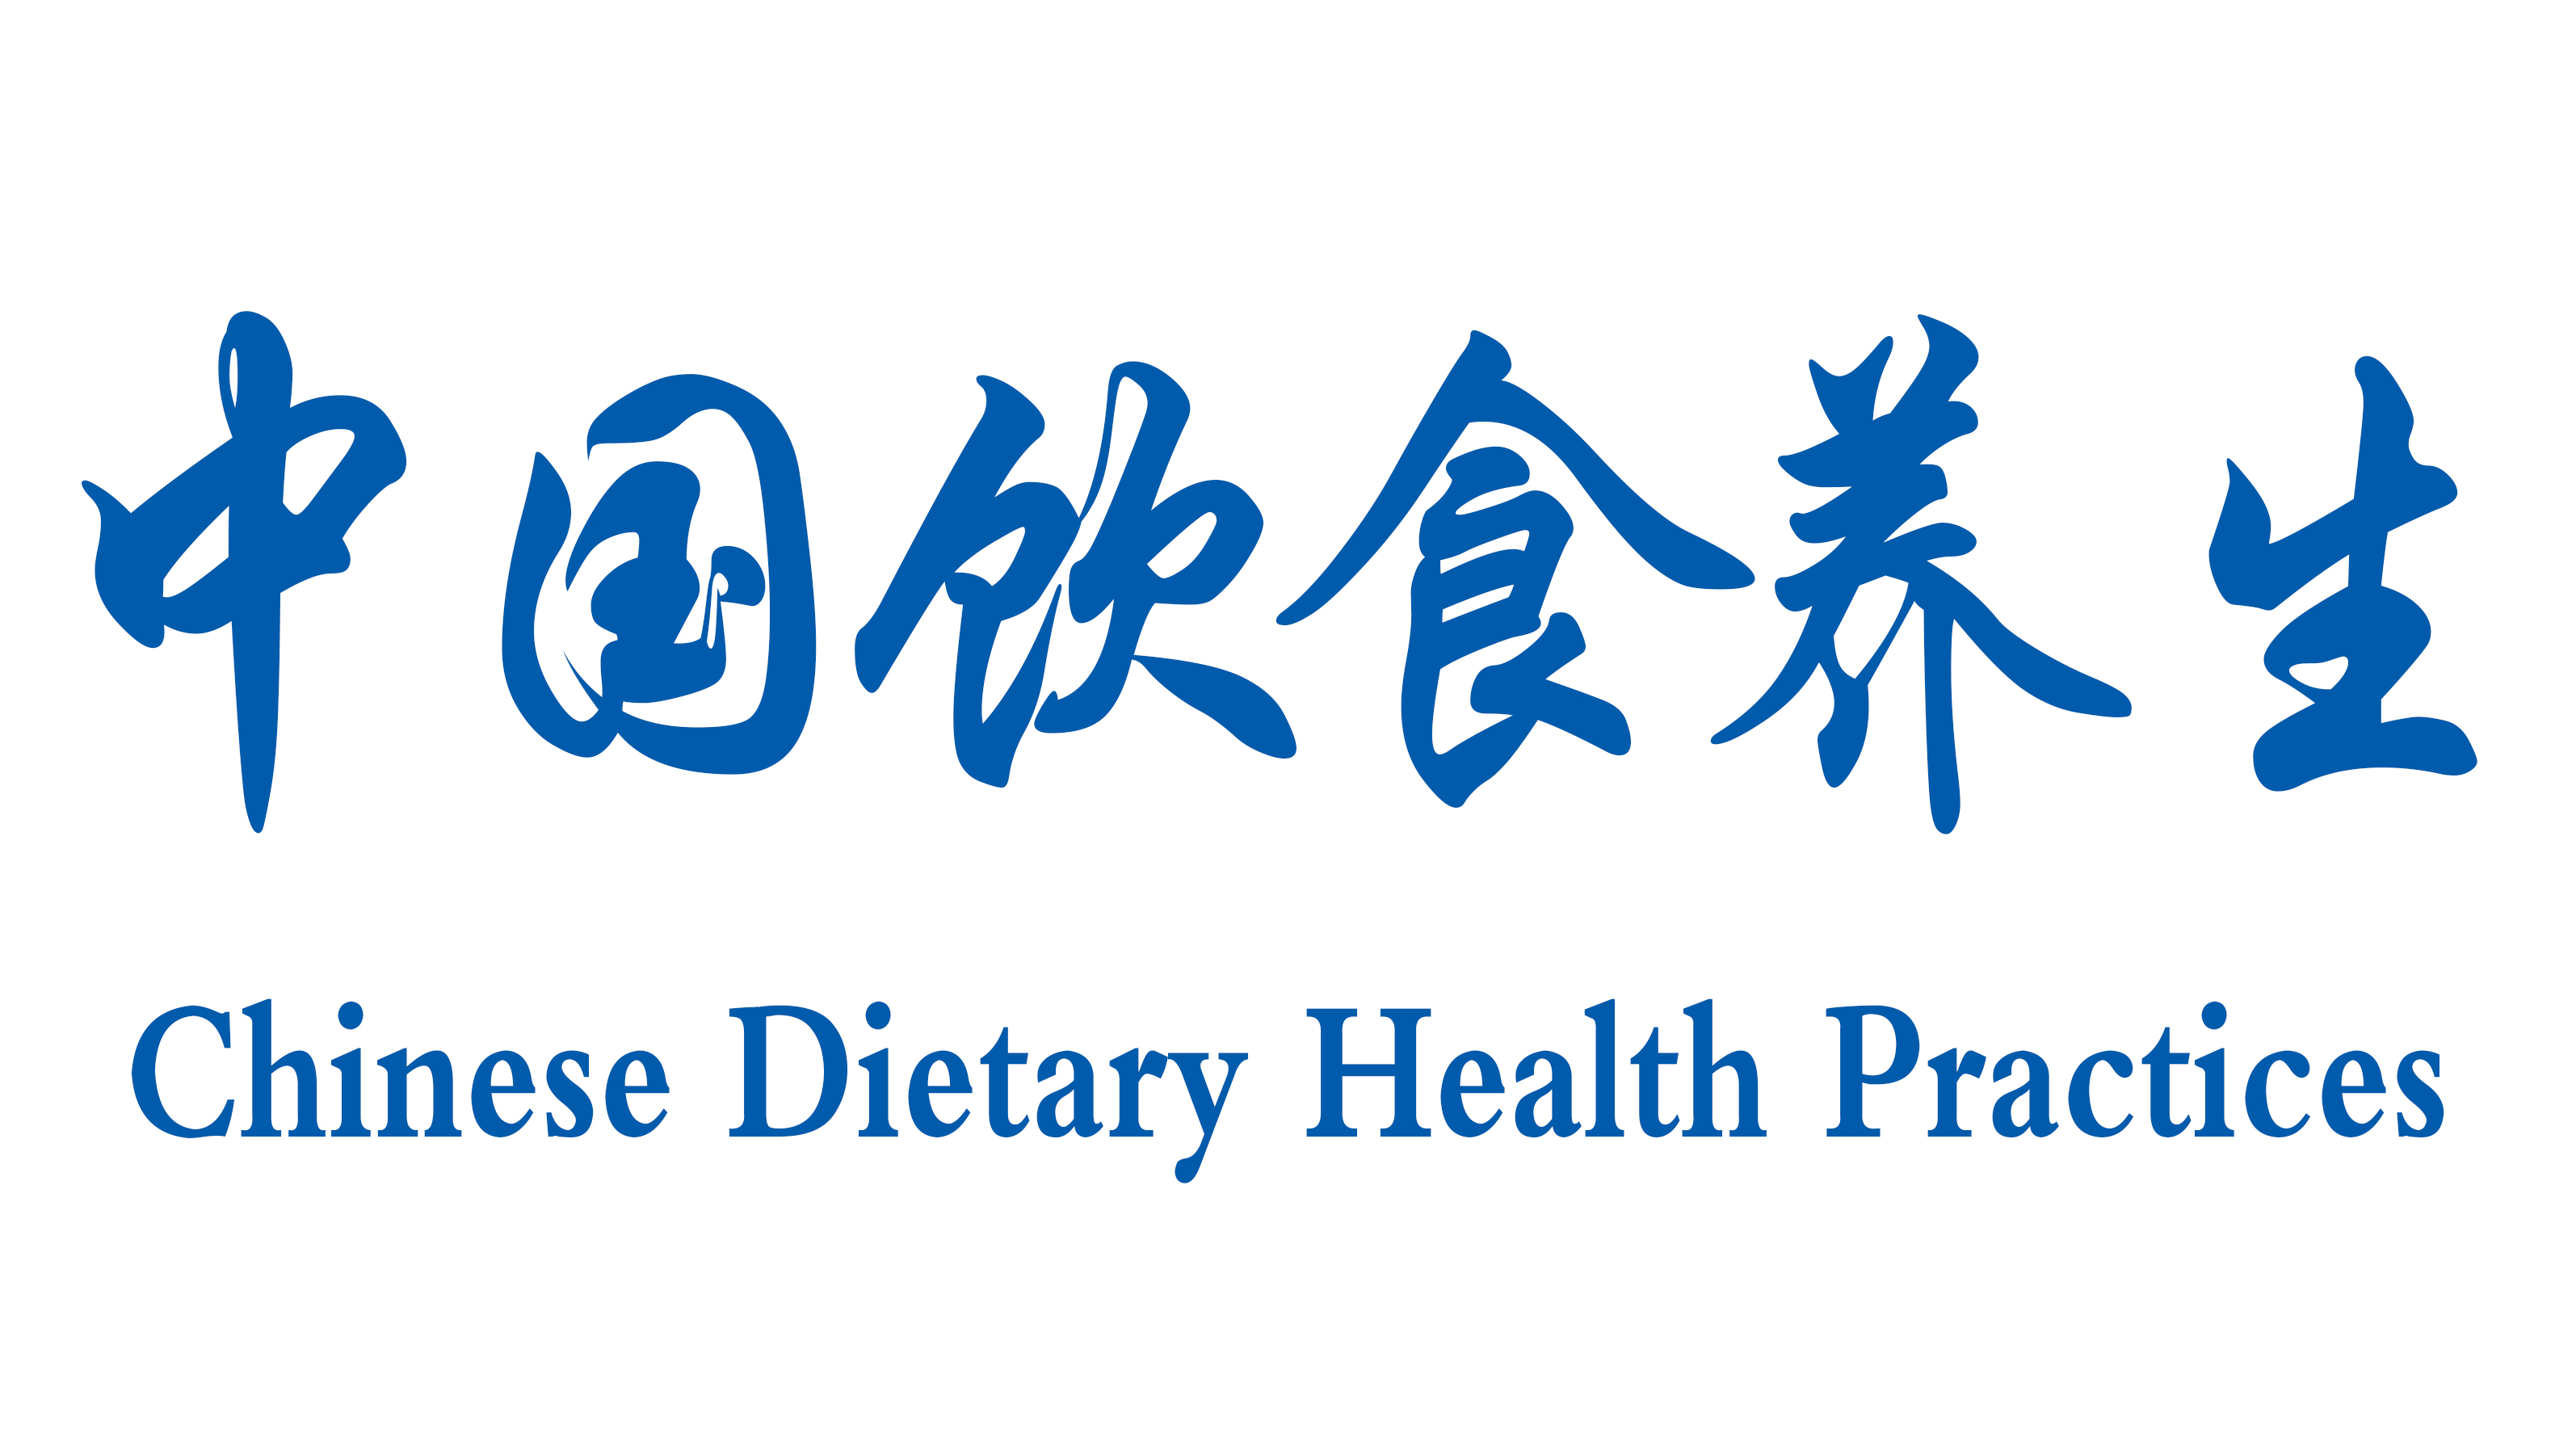 Chinese Dietary Health Practices